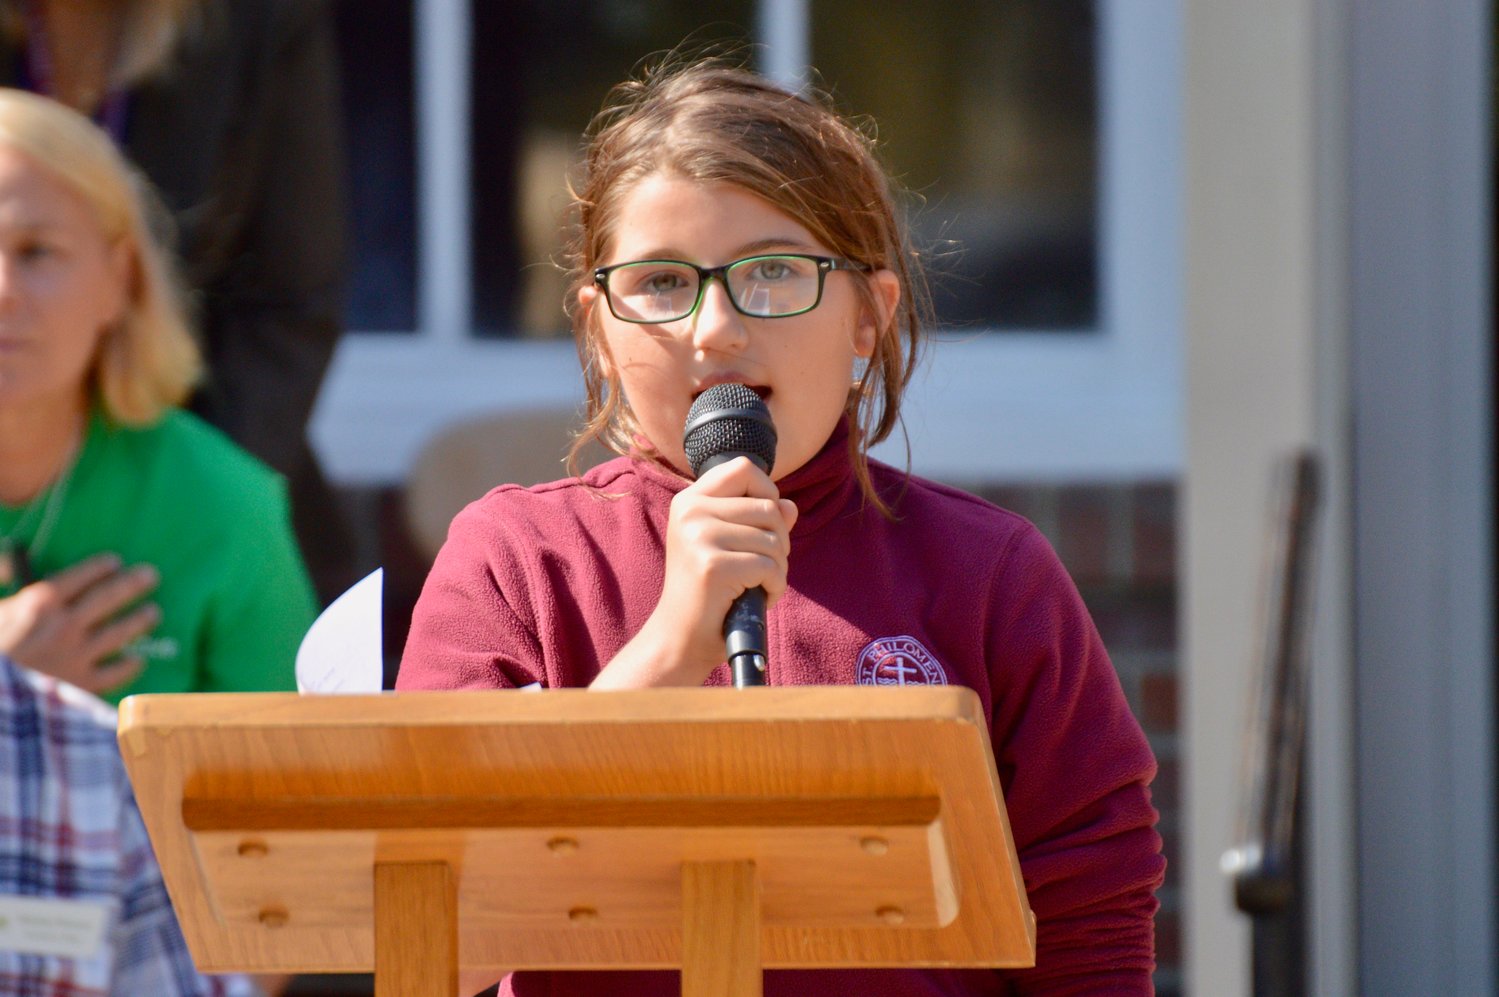 Lea Silvia, a sixth-grade student at St. Philomena School, sings The National Anthem at the start of Monday’s ceremony.